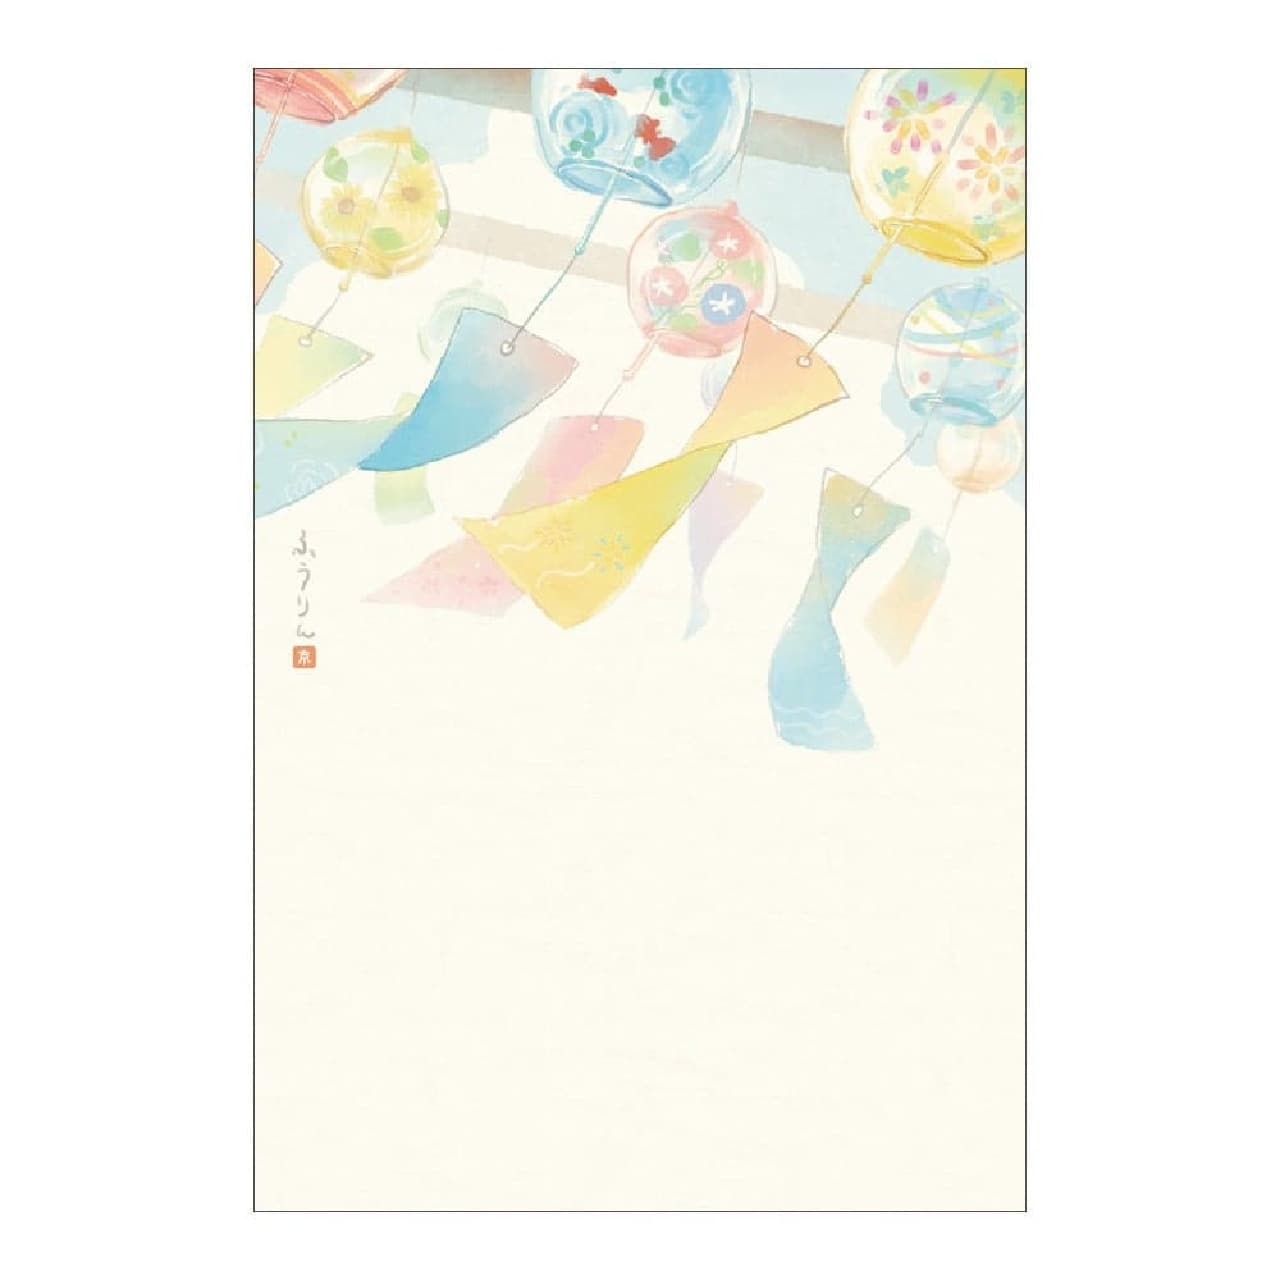 The long-awaited "Pictured Postcard 2024 Summer Pattern" sent by the Post Office Product Service will go on sale on May 7! The design evokes a summery atmosphere.